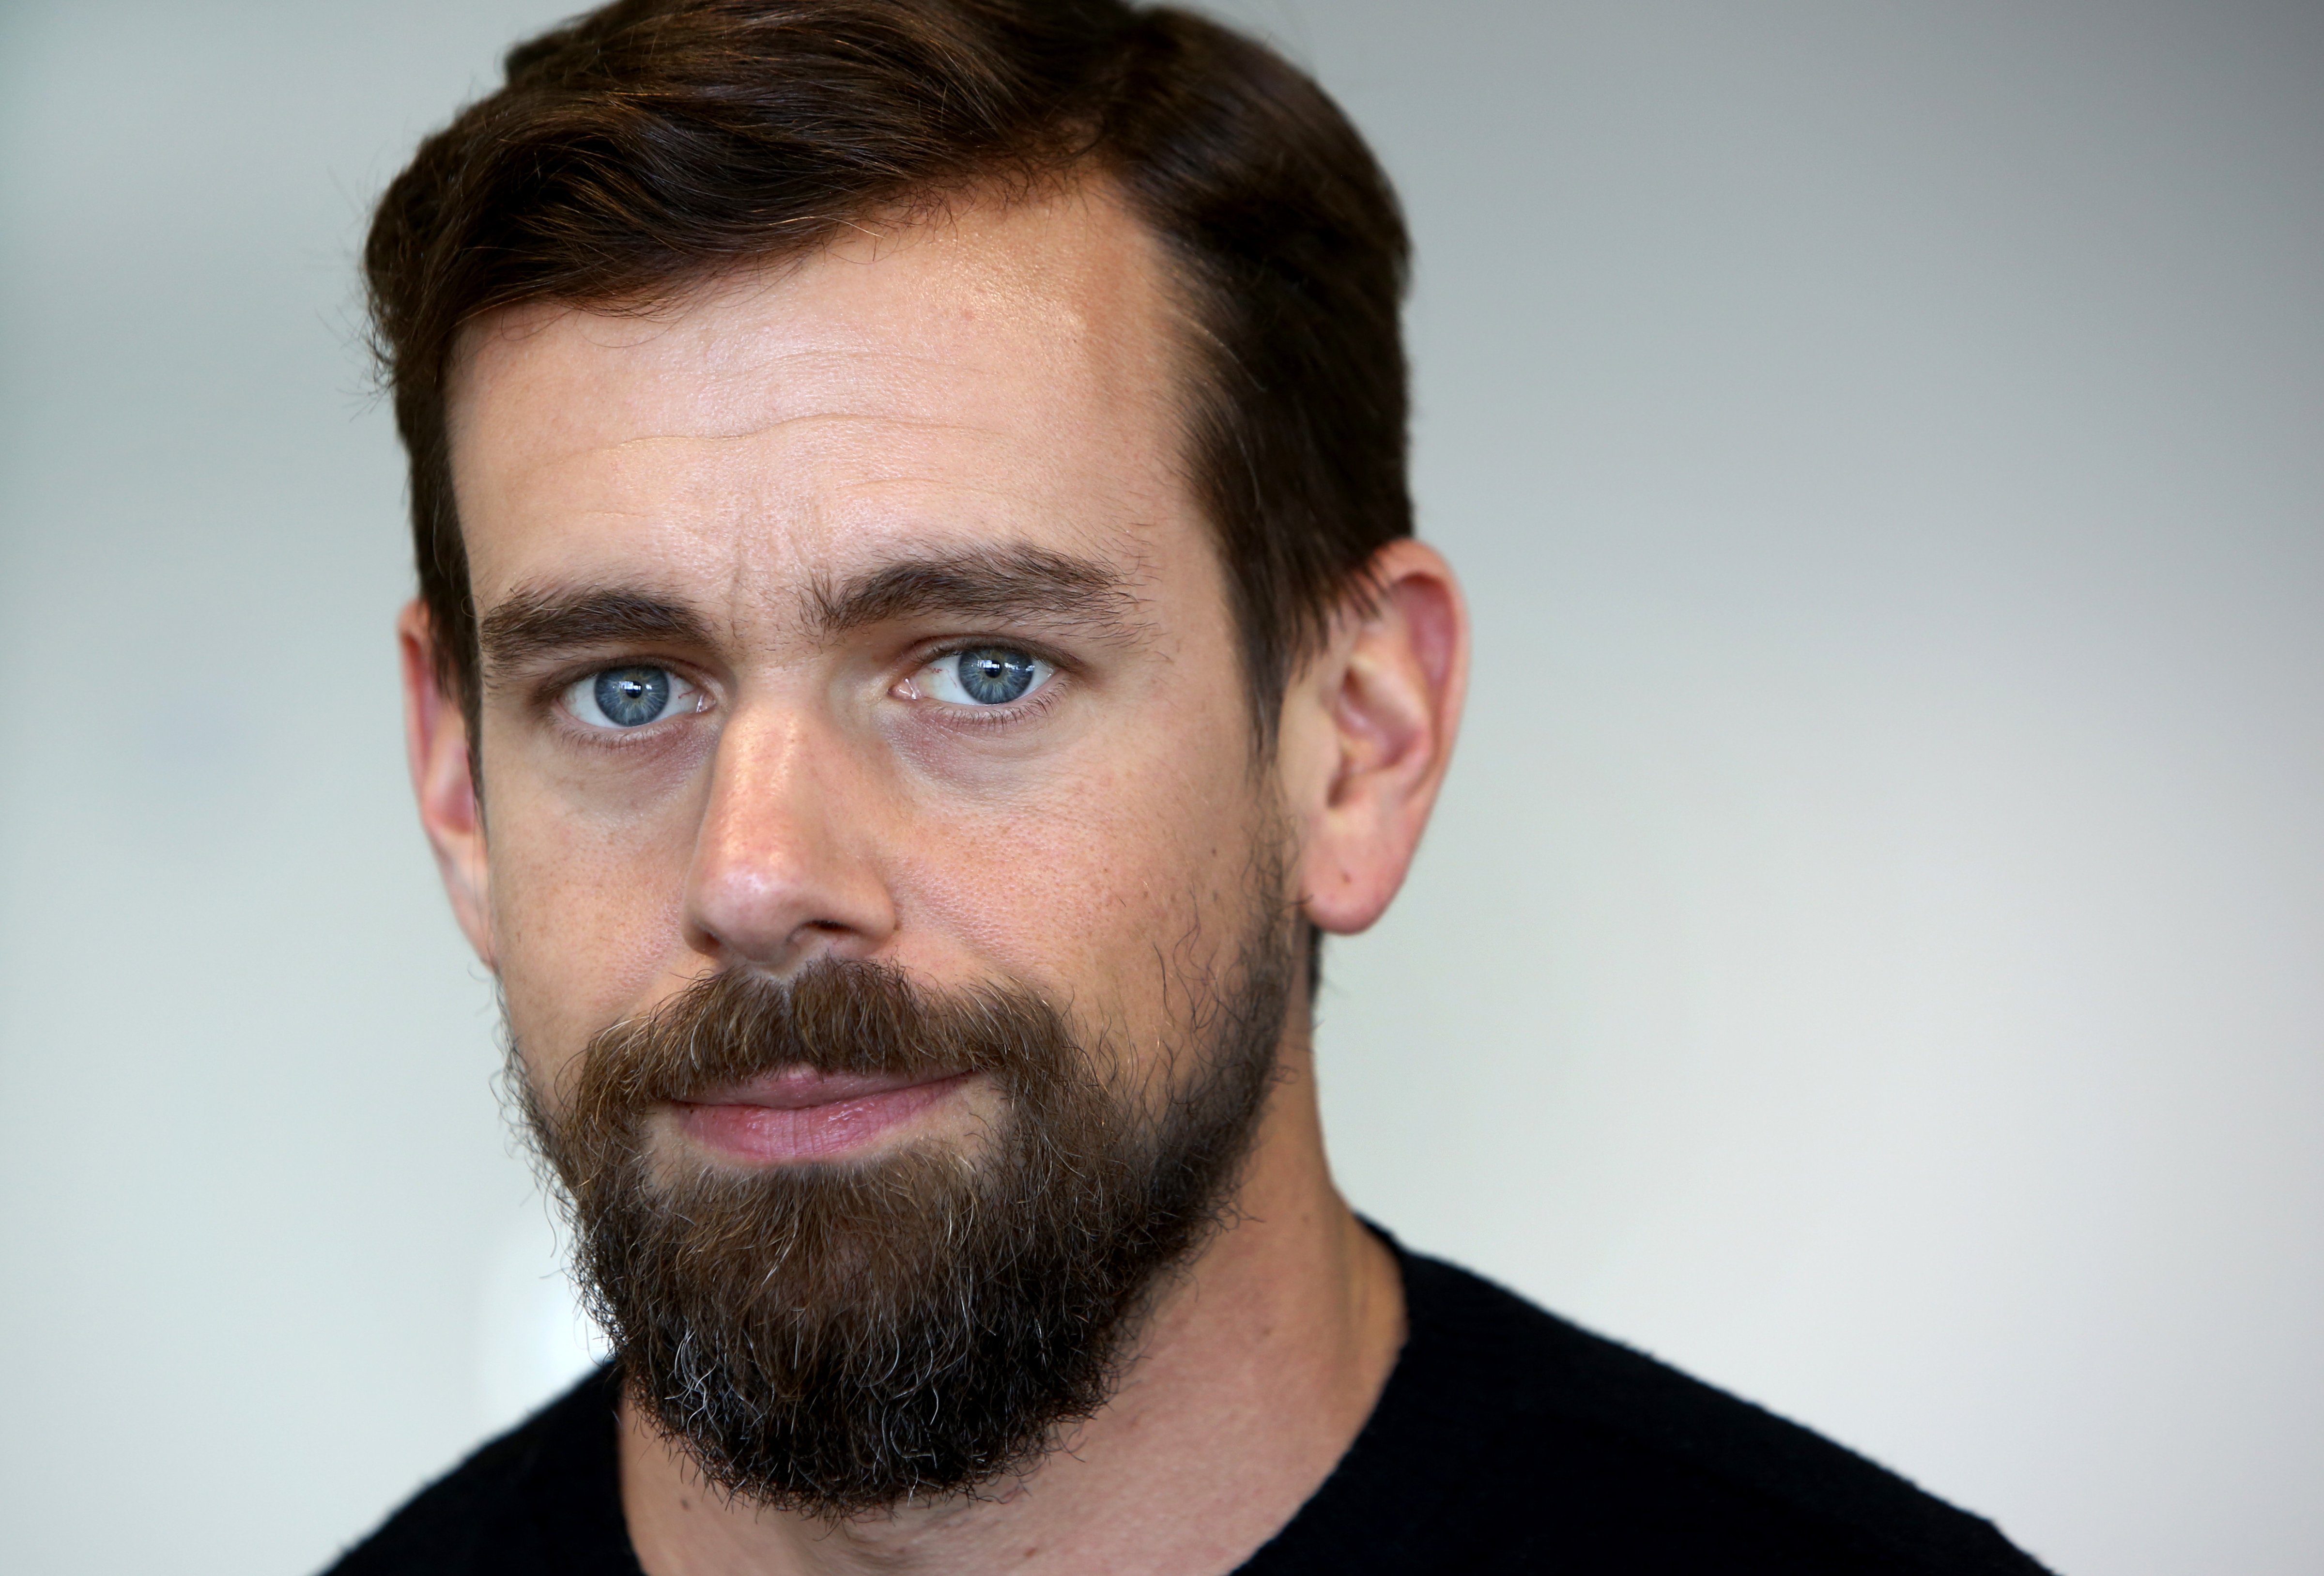 Twitter CEO Jack Dorsey poses during a photo shoot in Sydney, New South Wales. (Newspix/Getty Images)